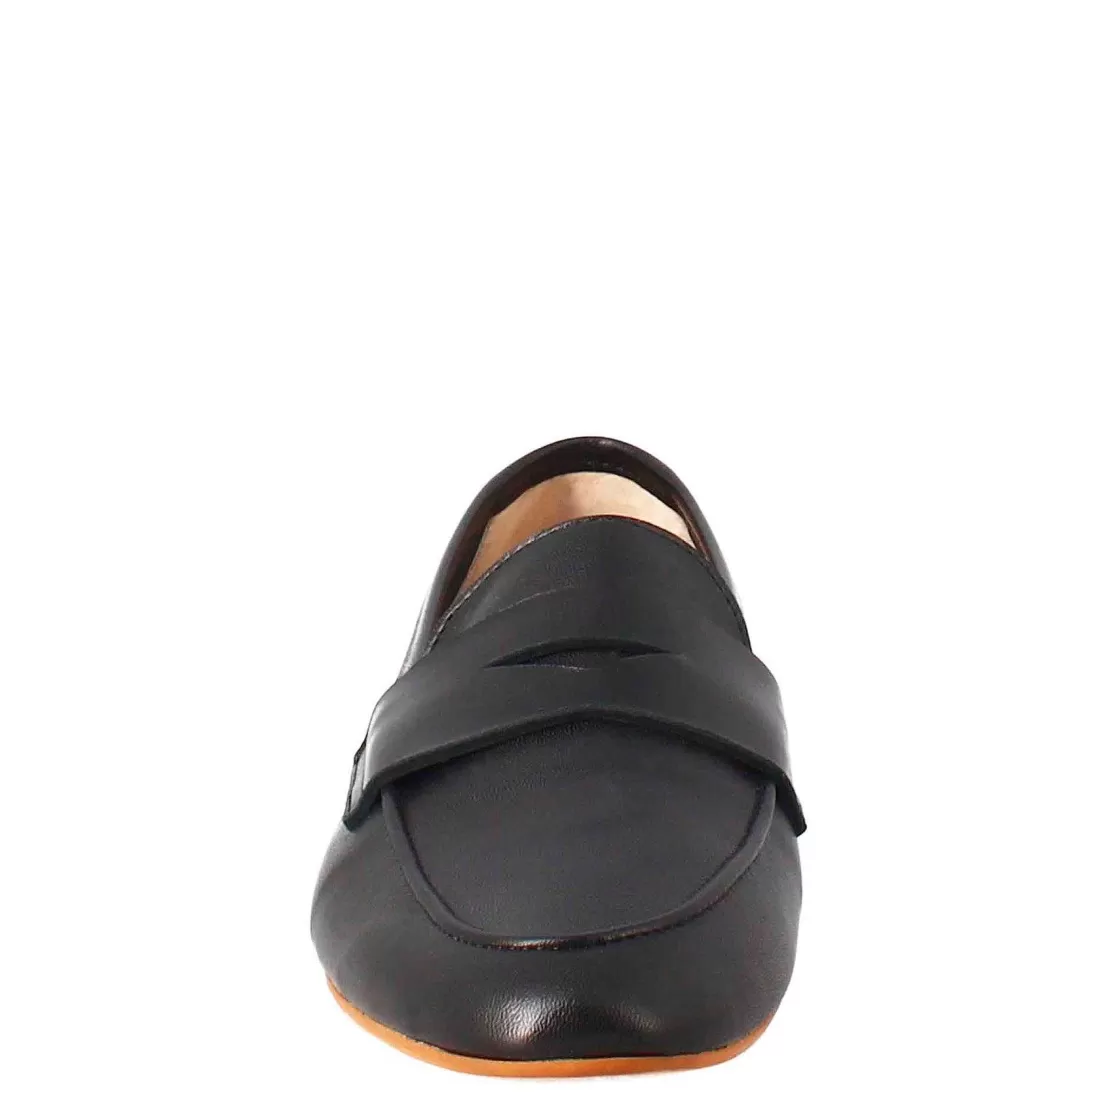 Leonardo Flexible Moccasin For Women In Black Leather And Rubber Sole Clearance